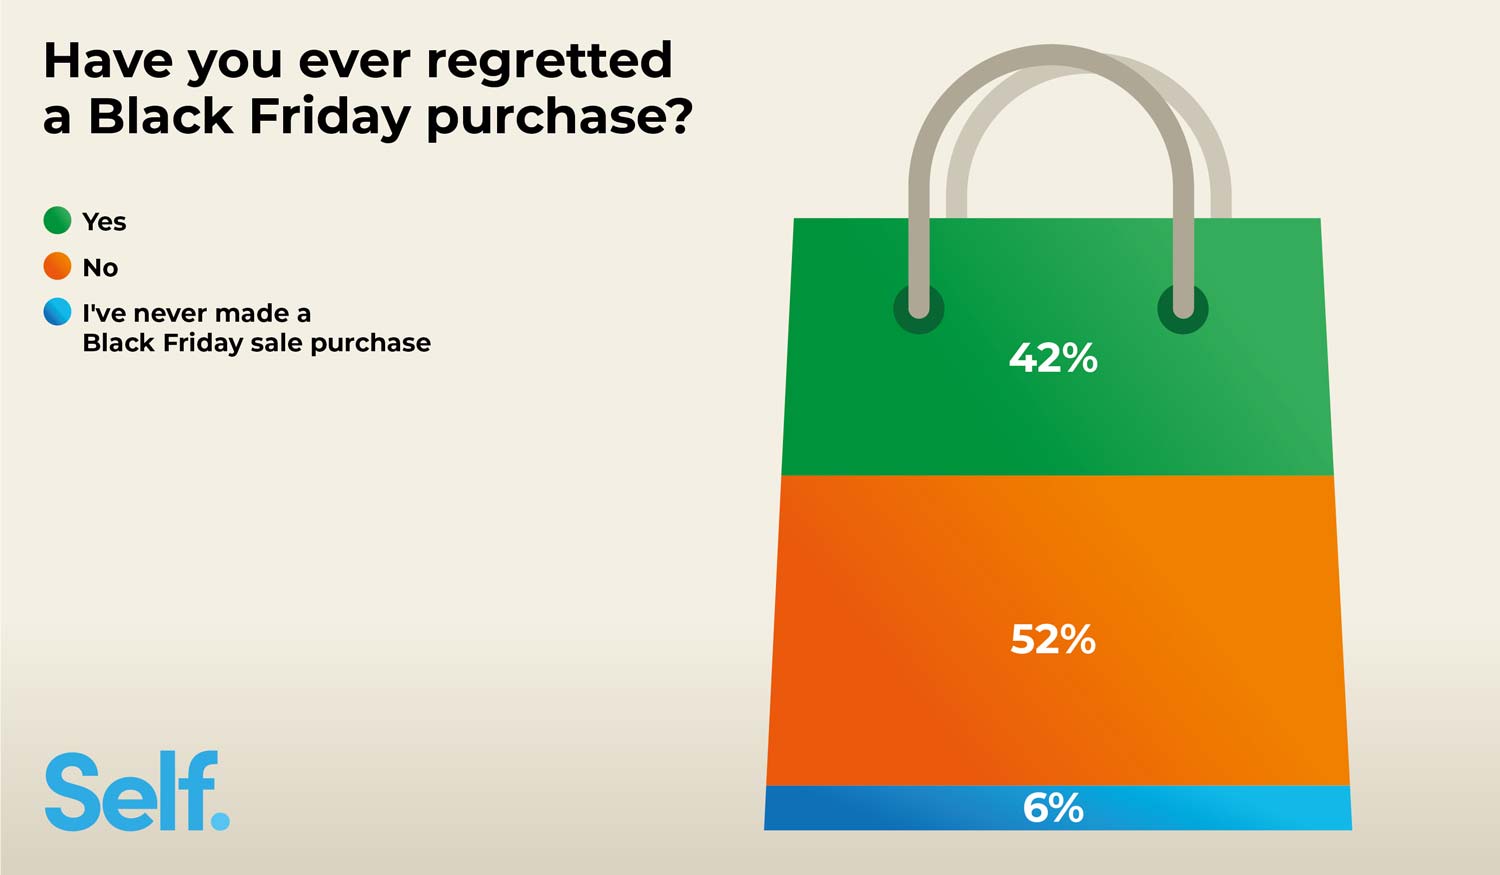 Have you ever regretted a Black Friday purchase?